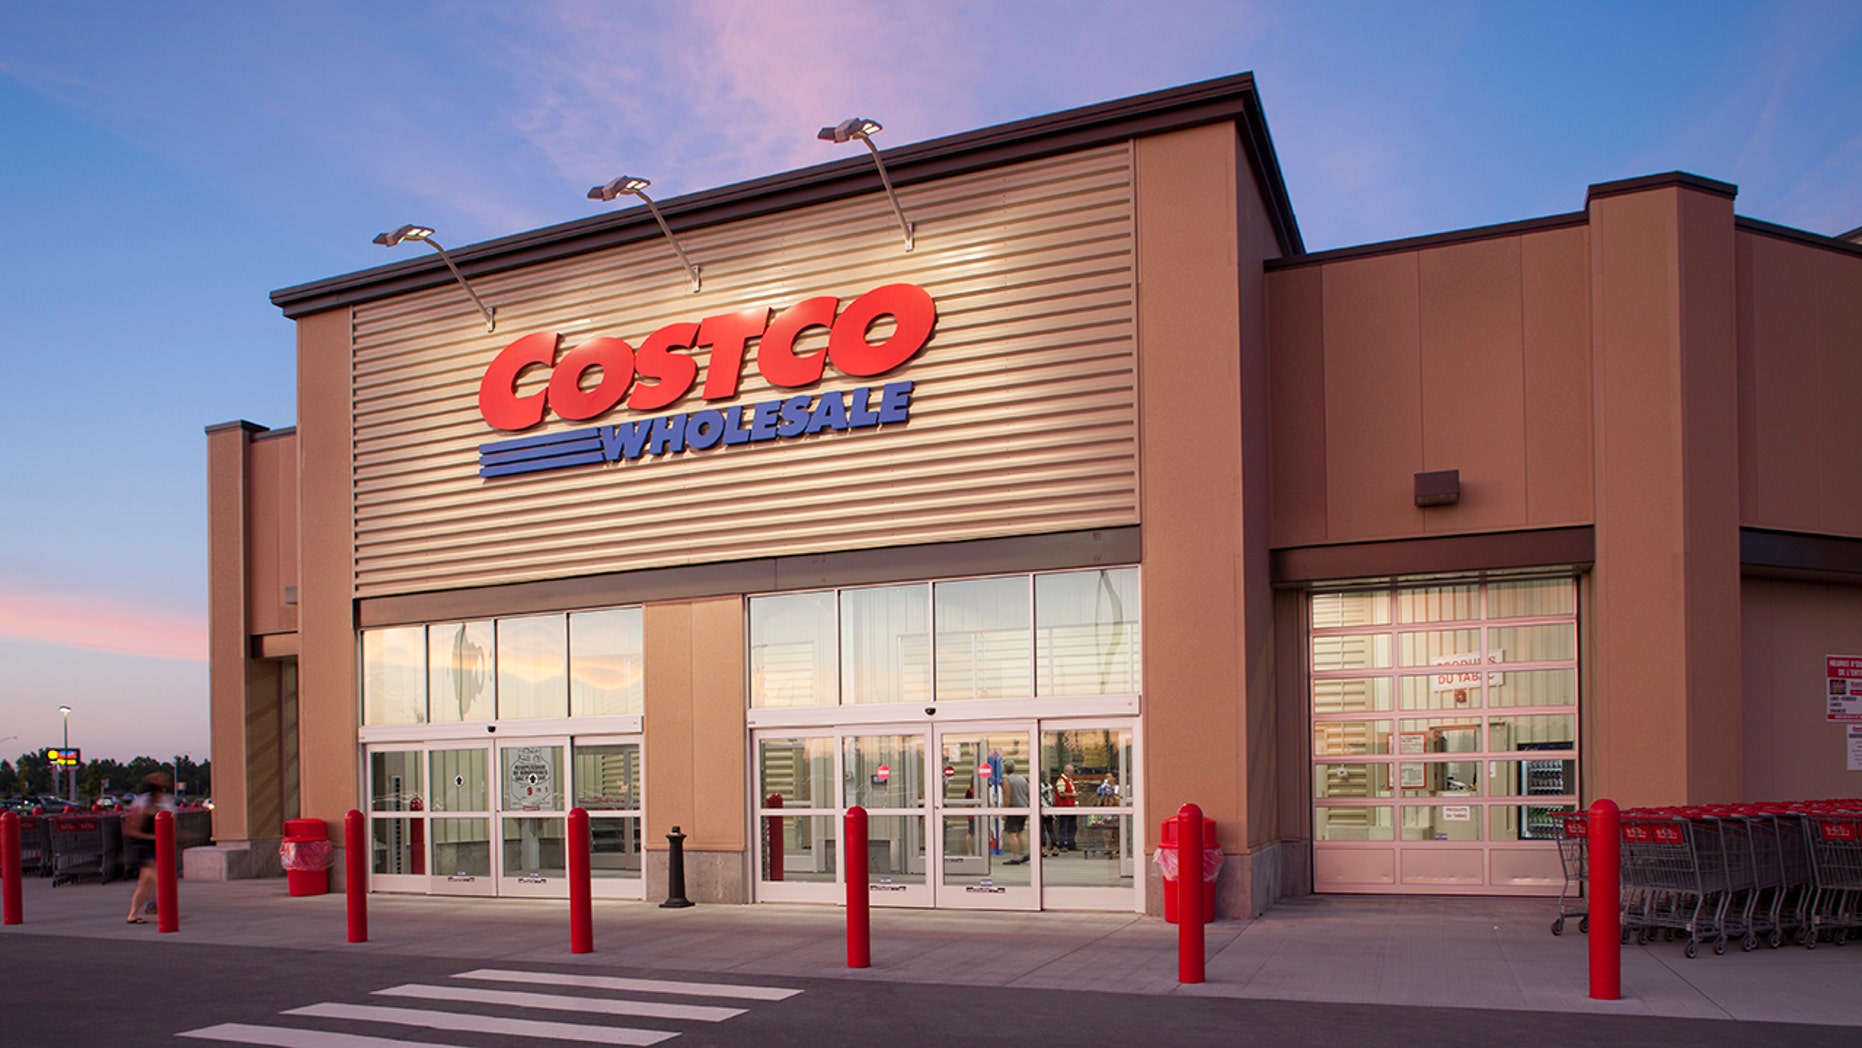 Senior citizens at South Carolina Costco get into physical fight over